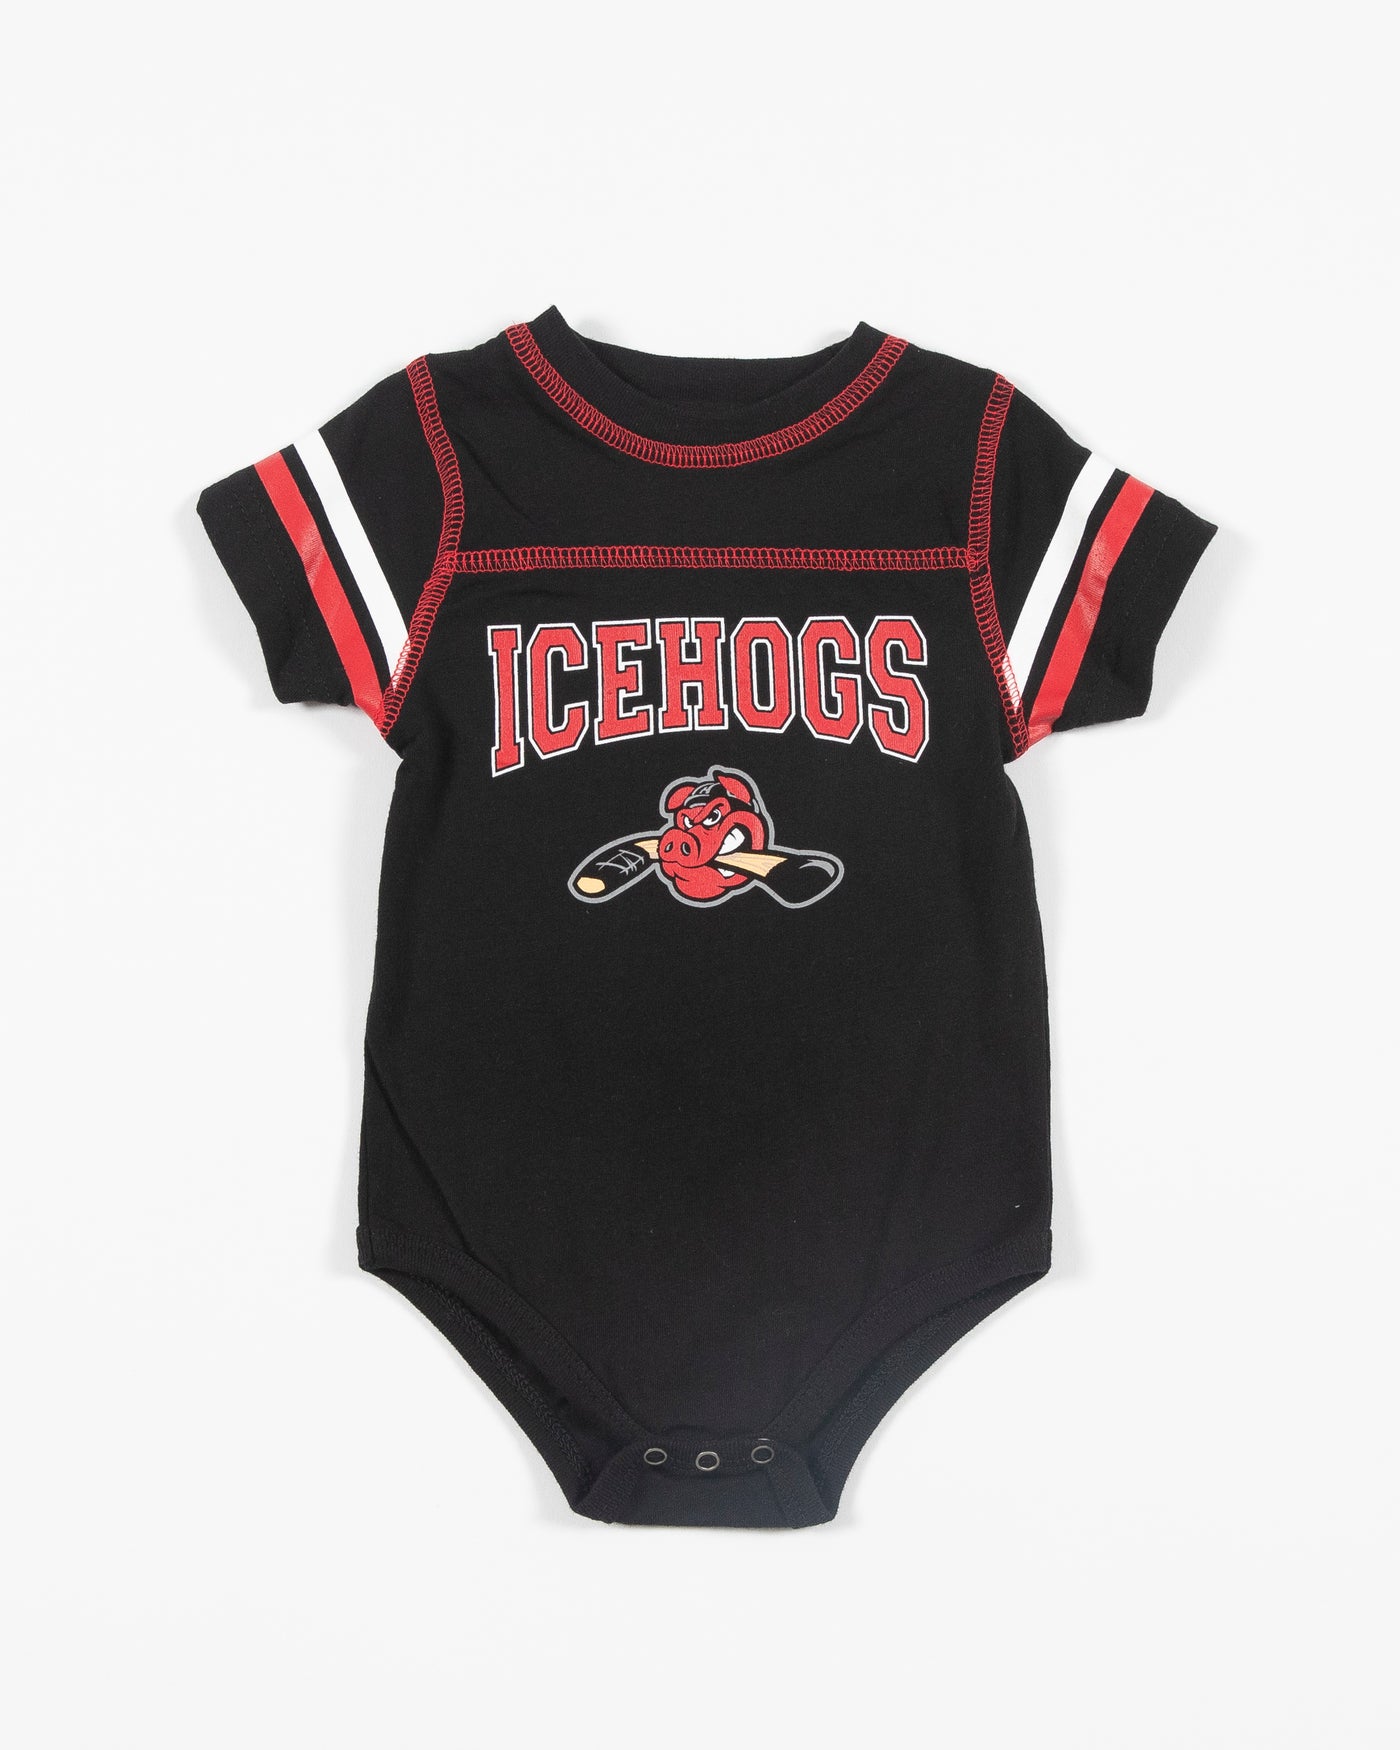 black and red Rockford IceHogs onesie and bib set - onesie front lay flat